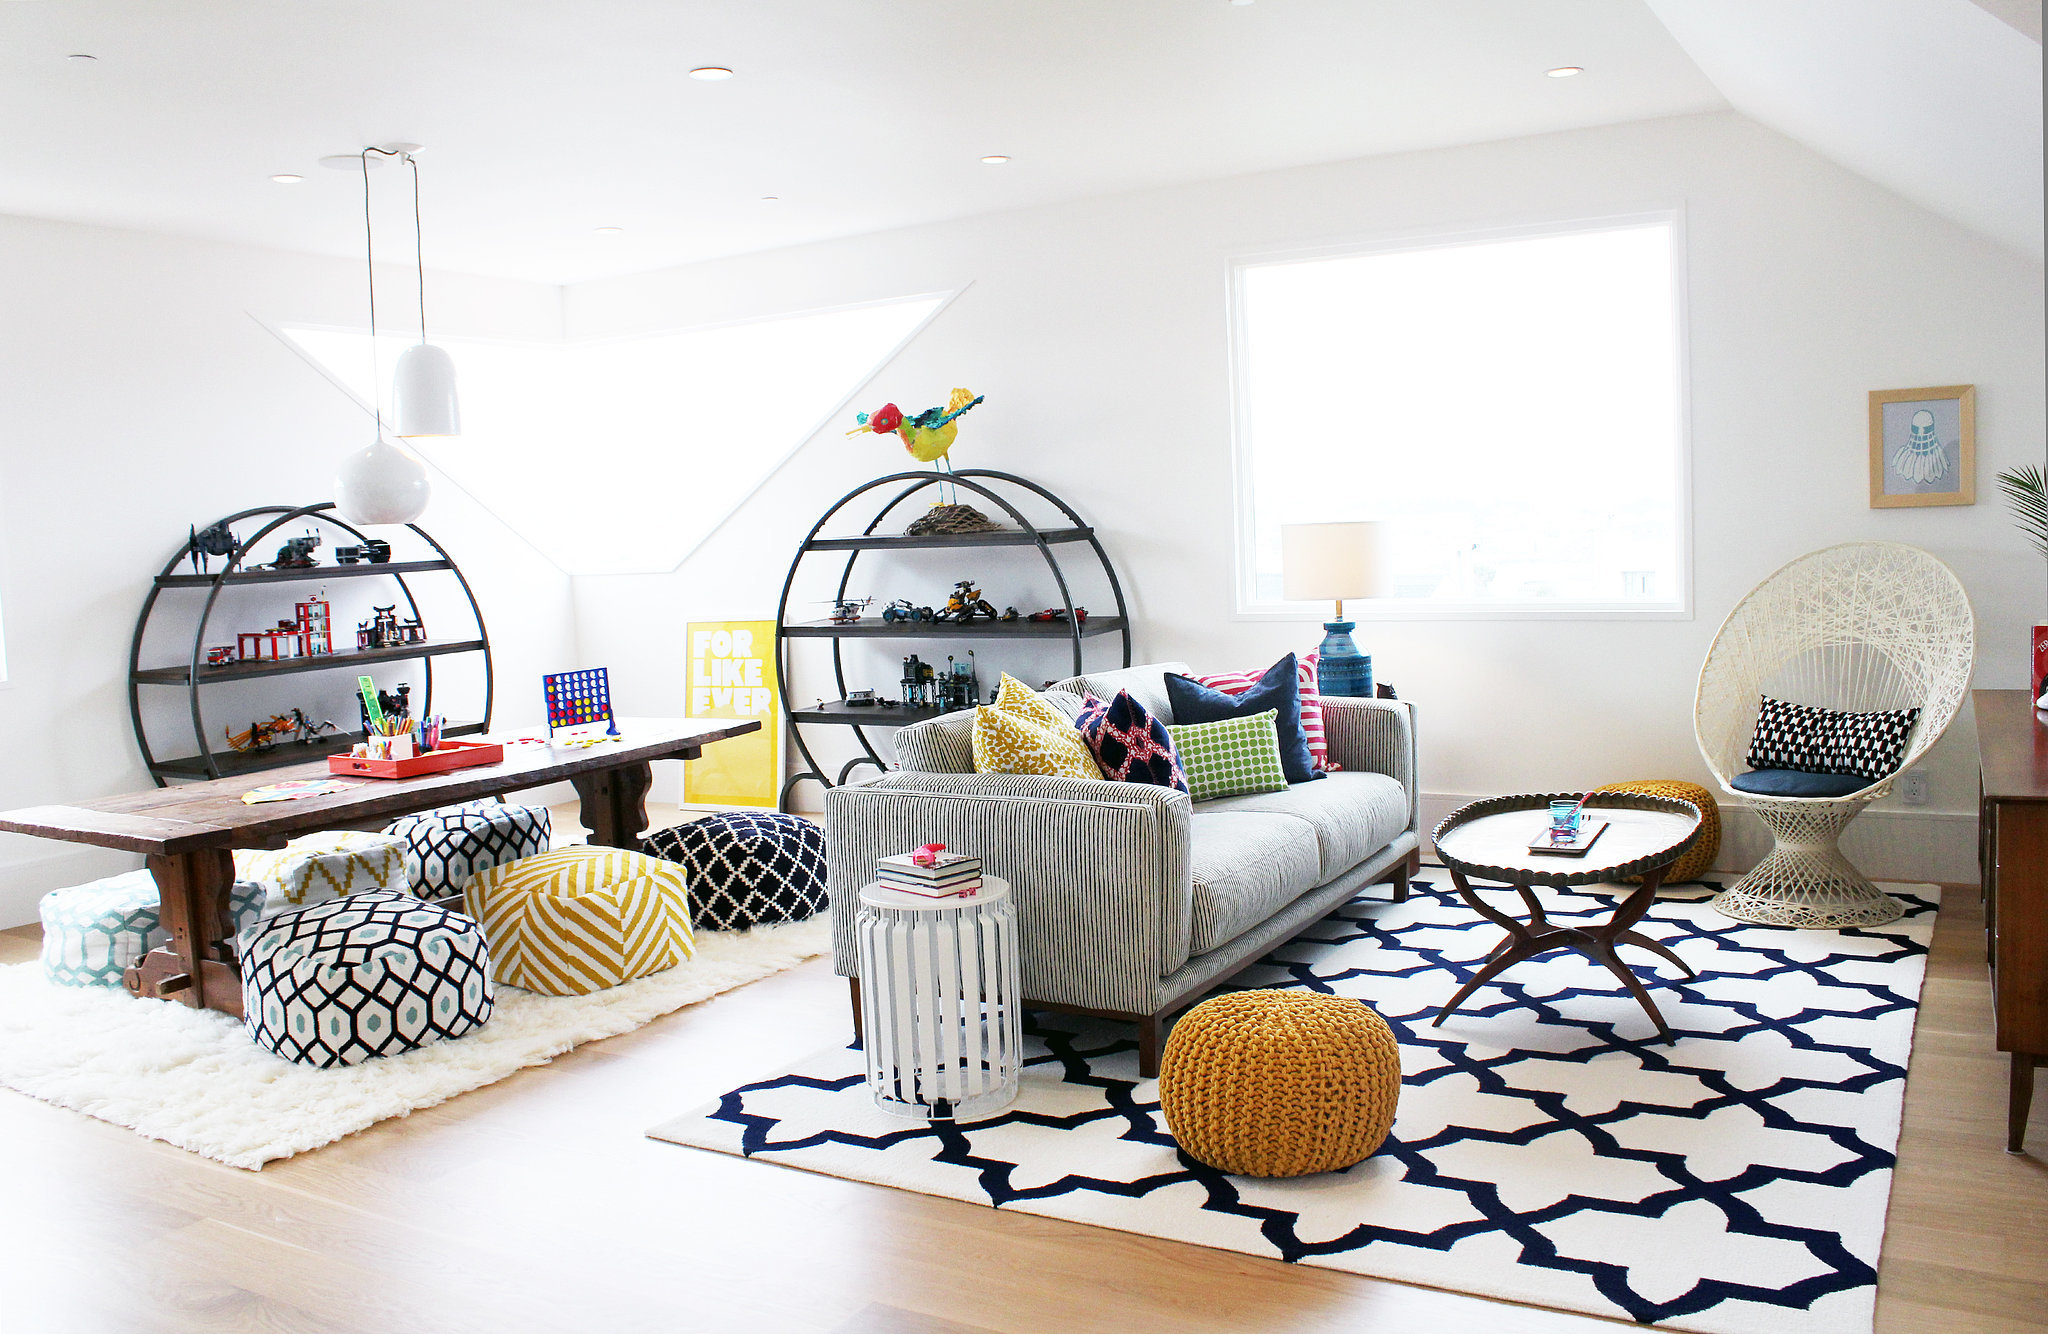 If You Want To Be A Winner, Change Your How To Decorate A Studio Apartment Philosophy Now!